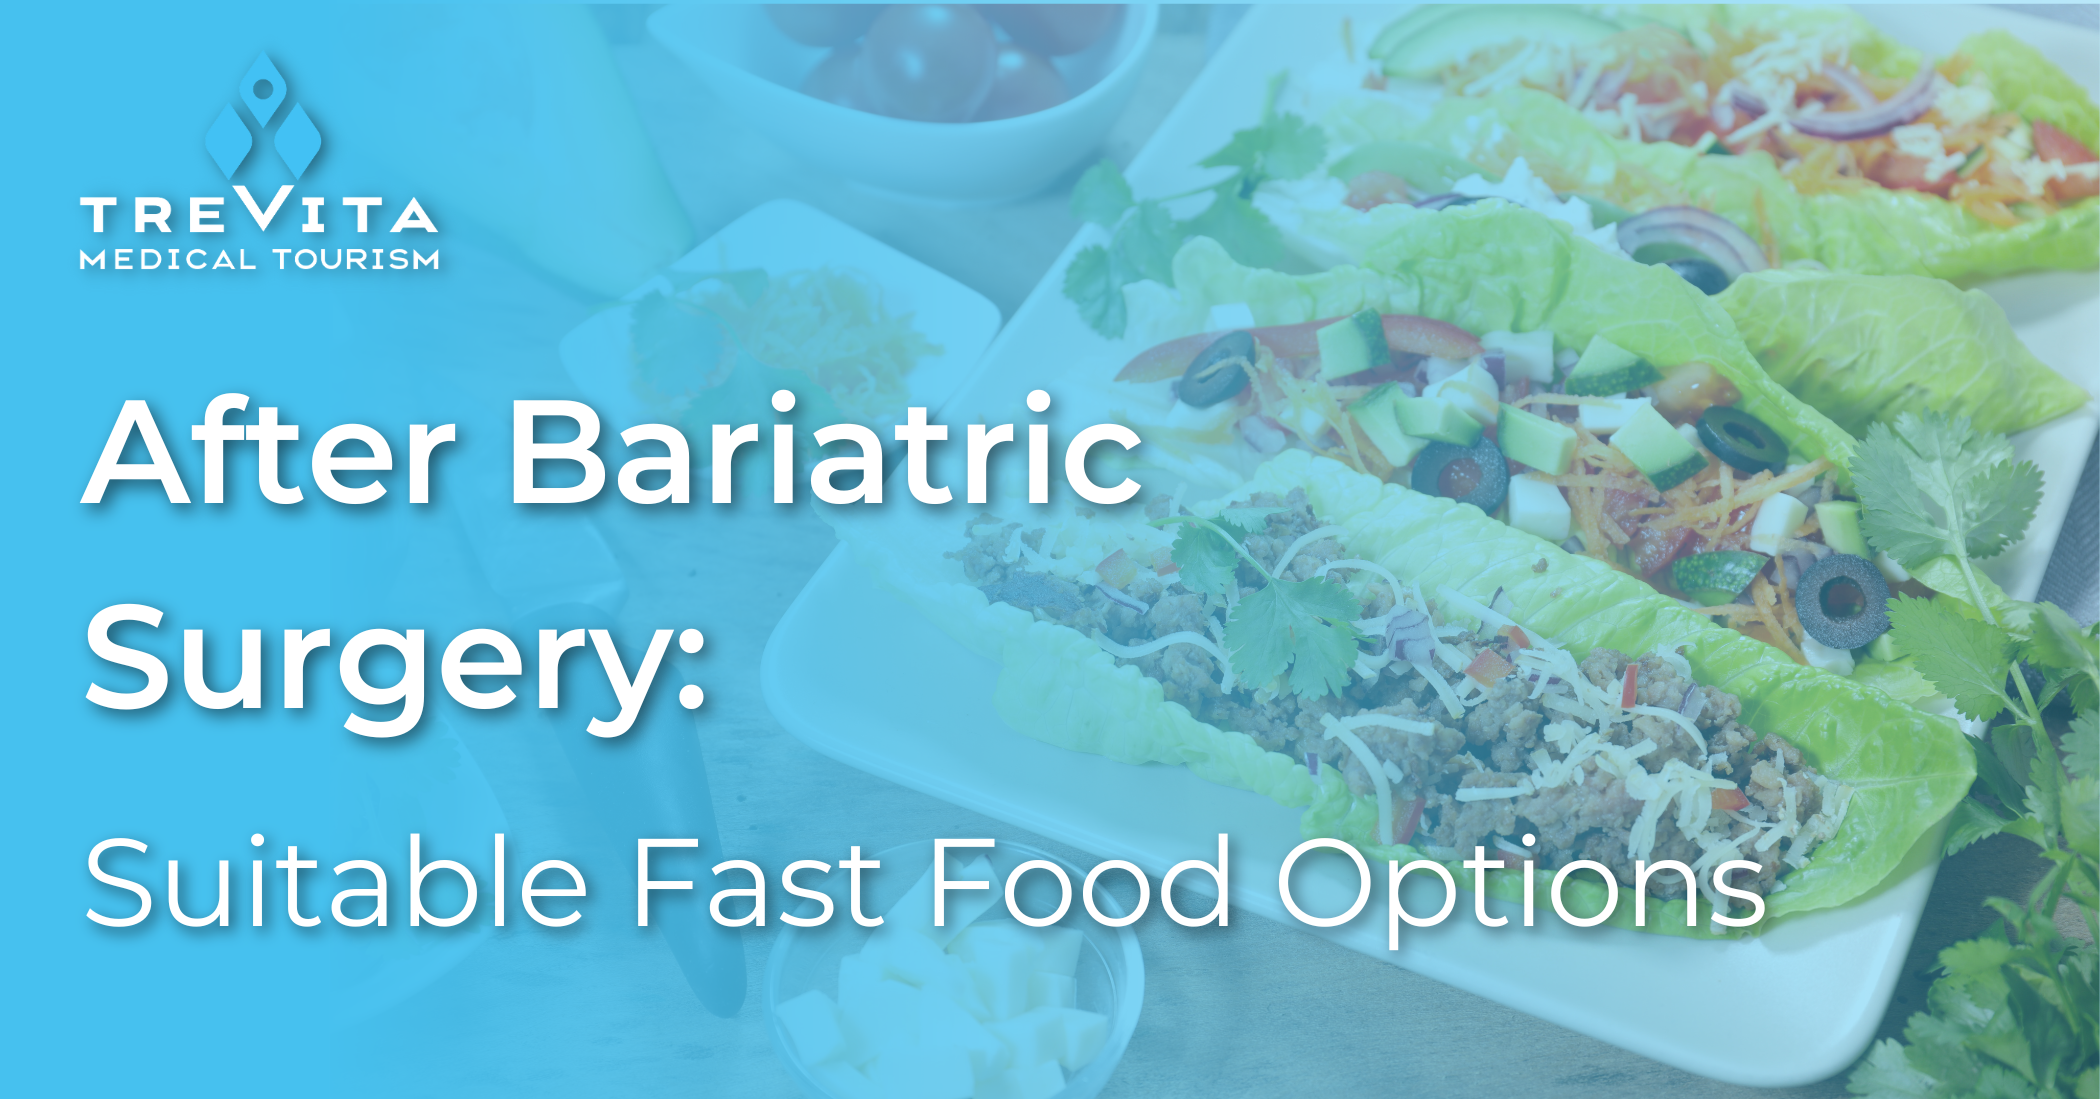 After Bariatric Surgery: Suitable Fast Food Options